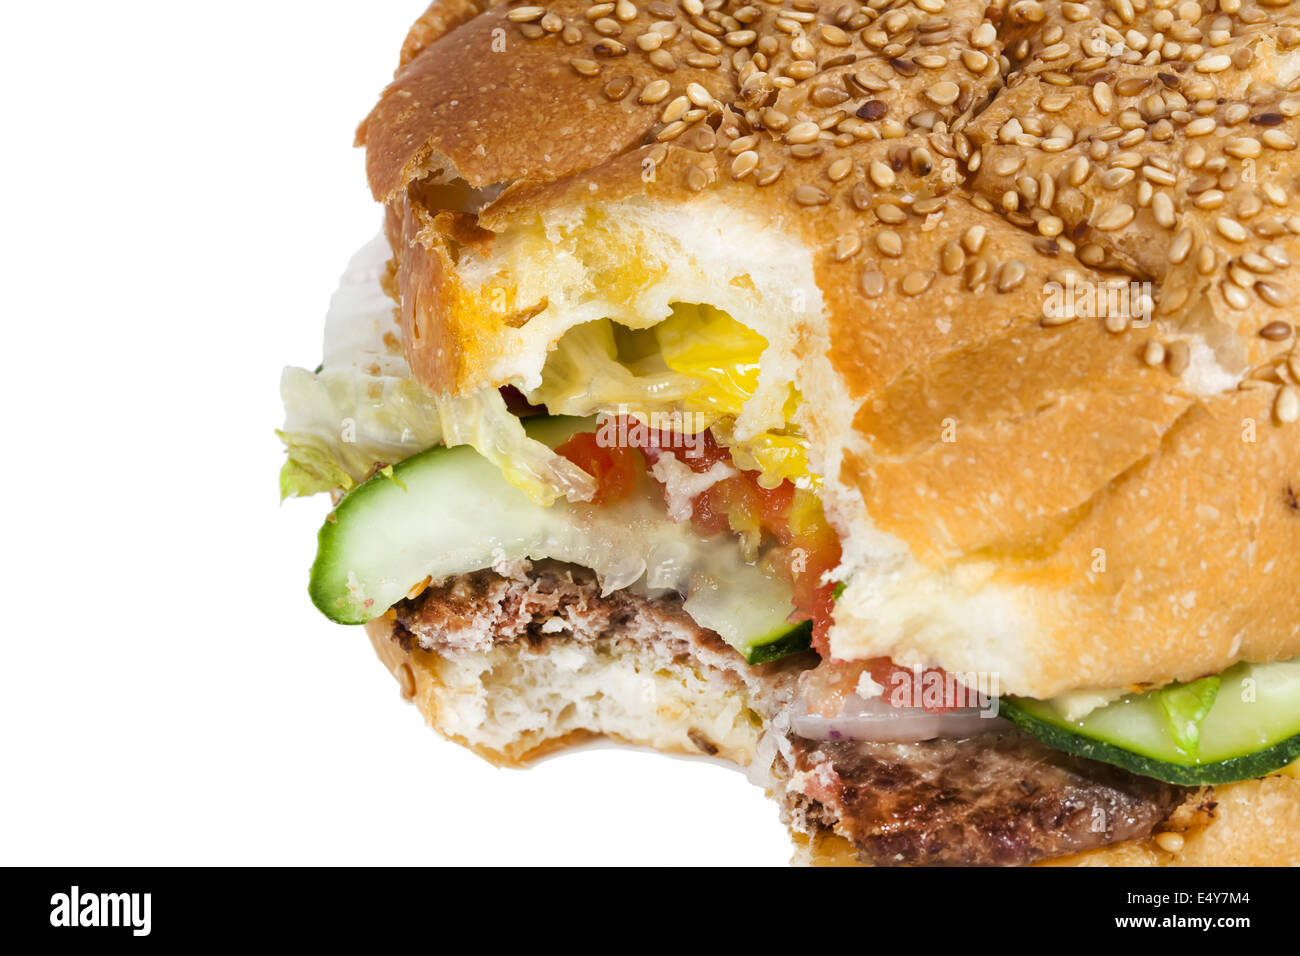 Bitten burger with meat and vegetables Stock Photo